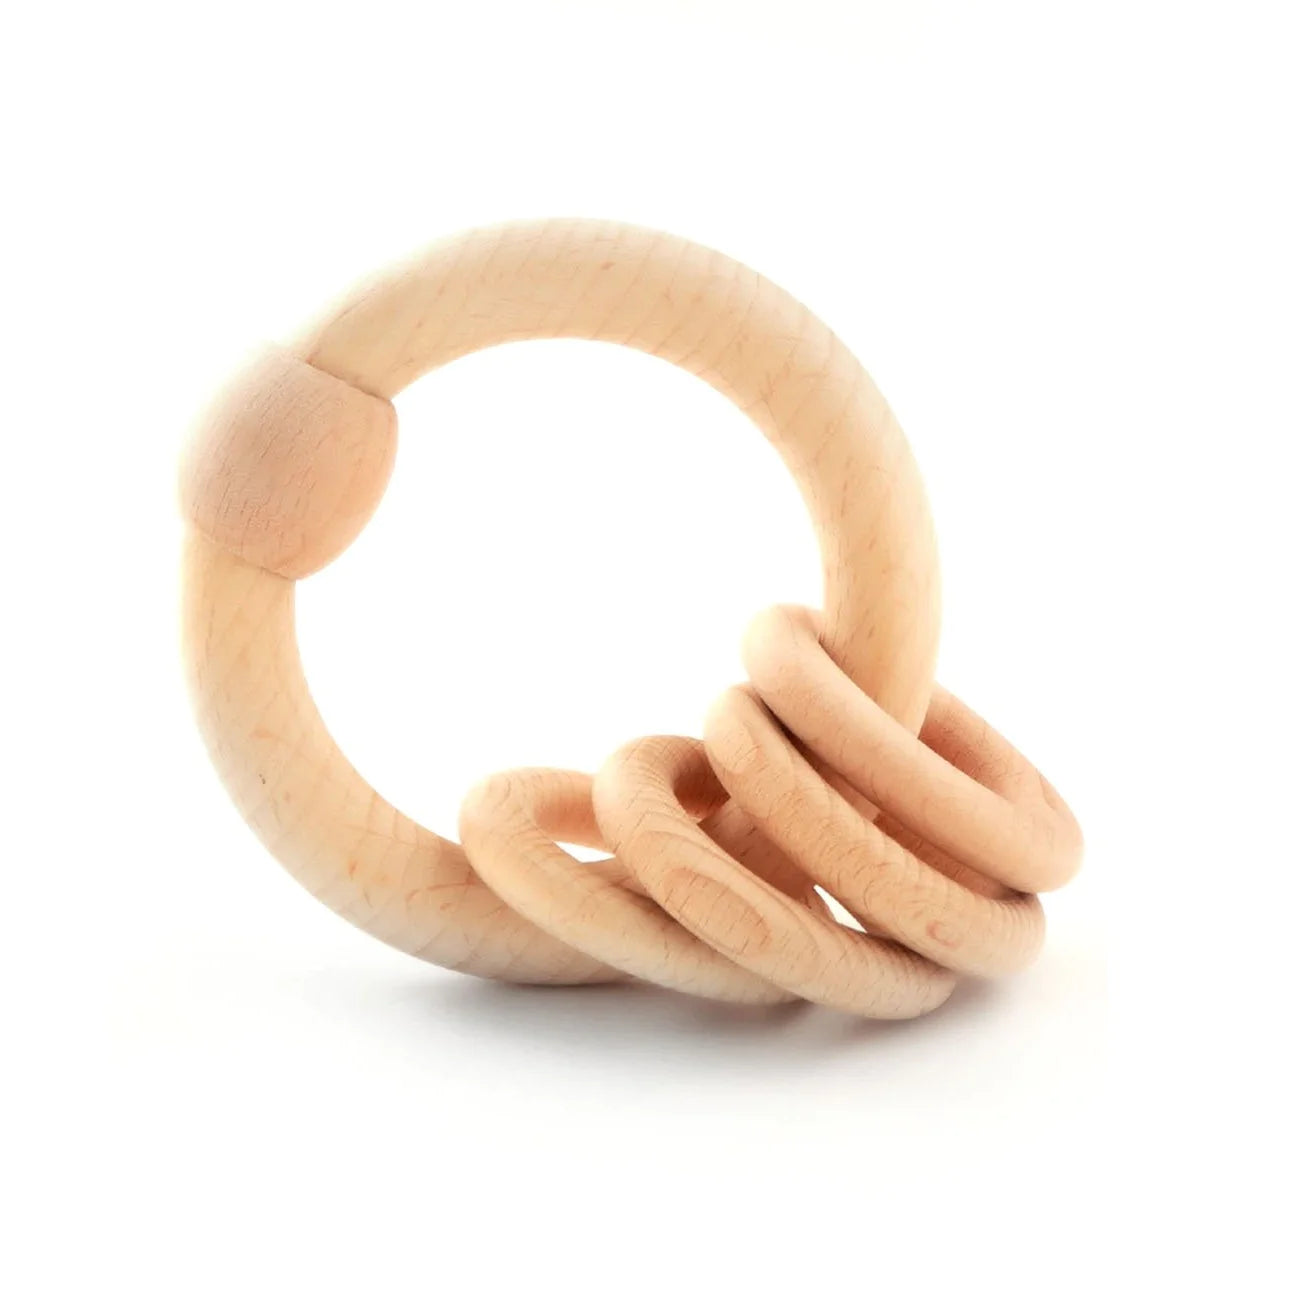 Circular Rattle With Wooden Rings